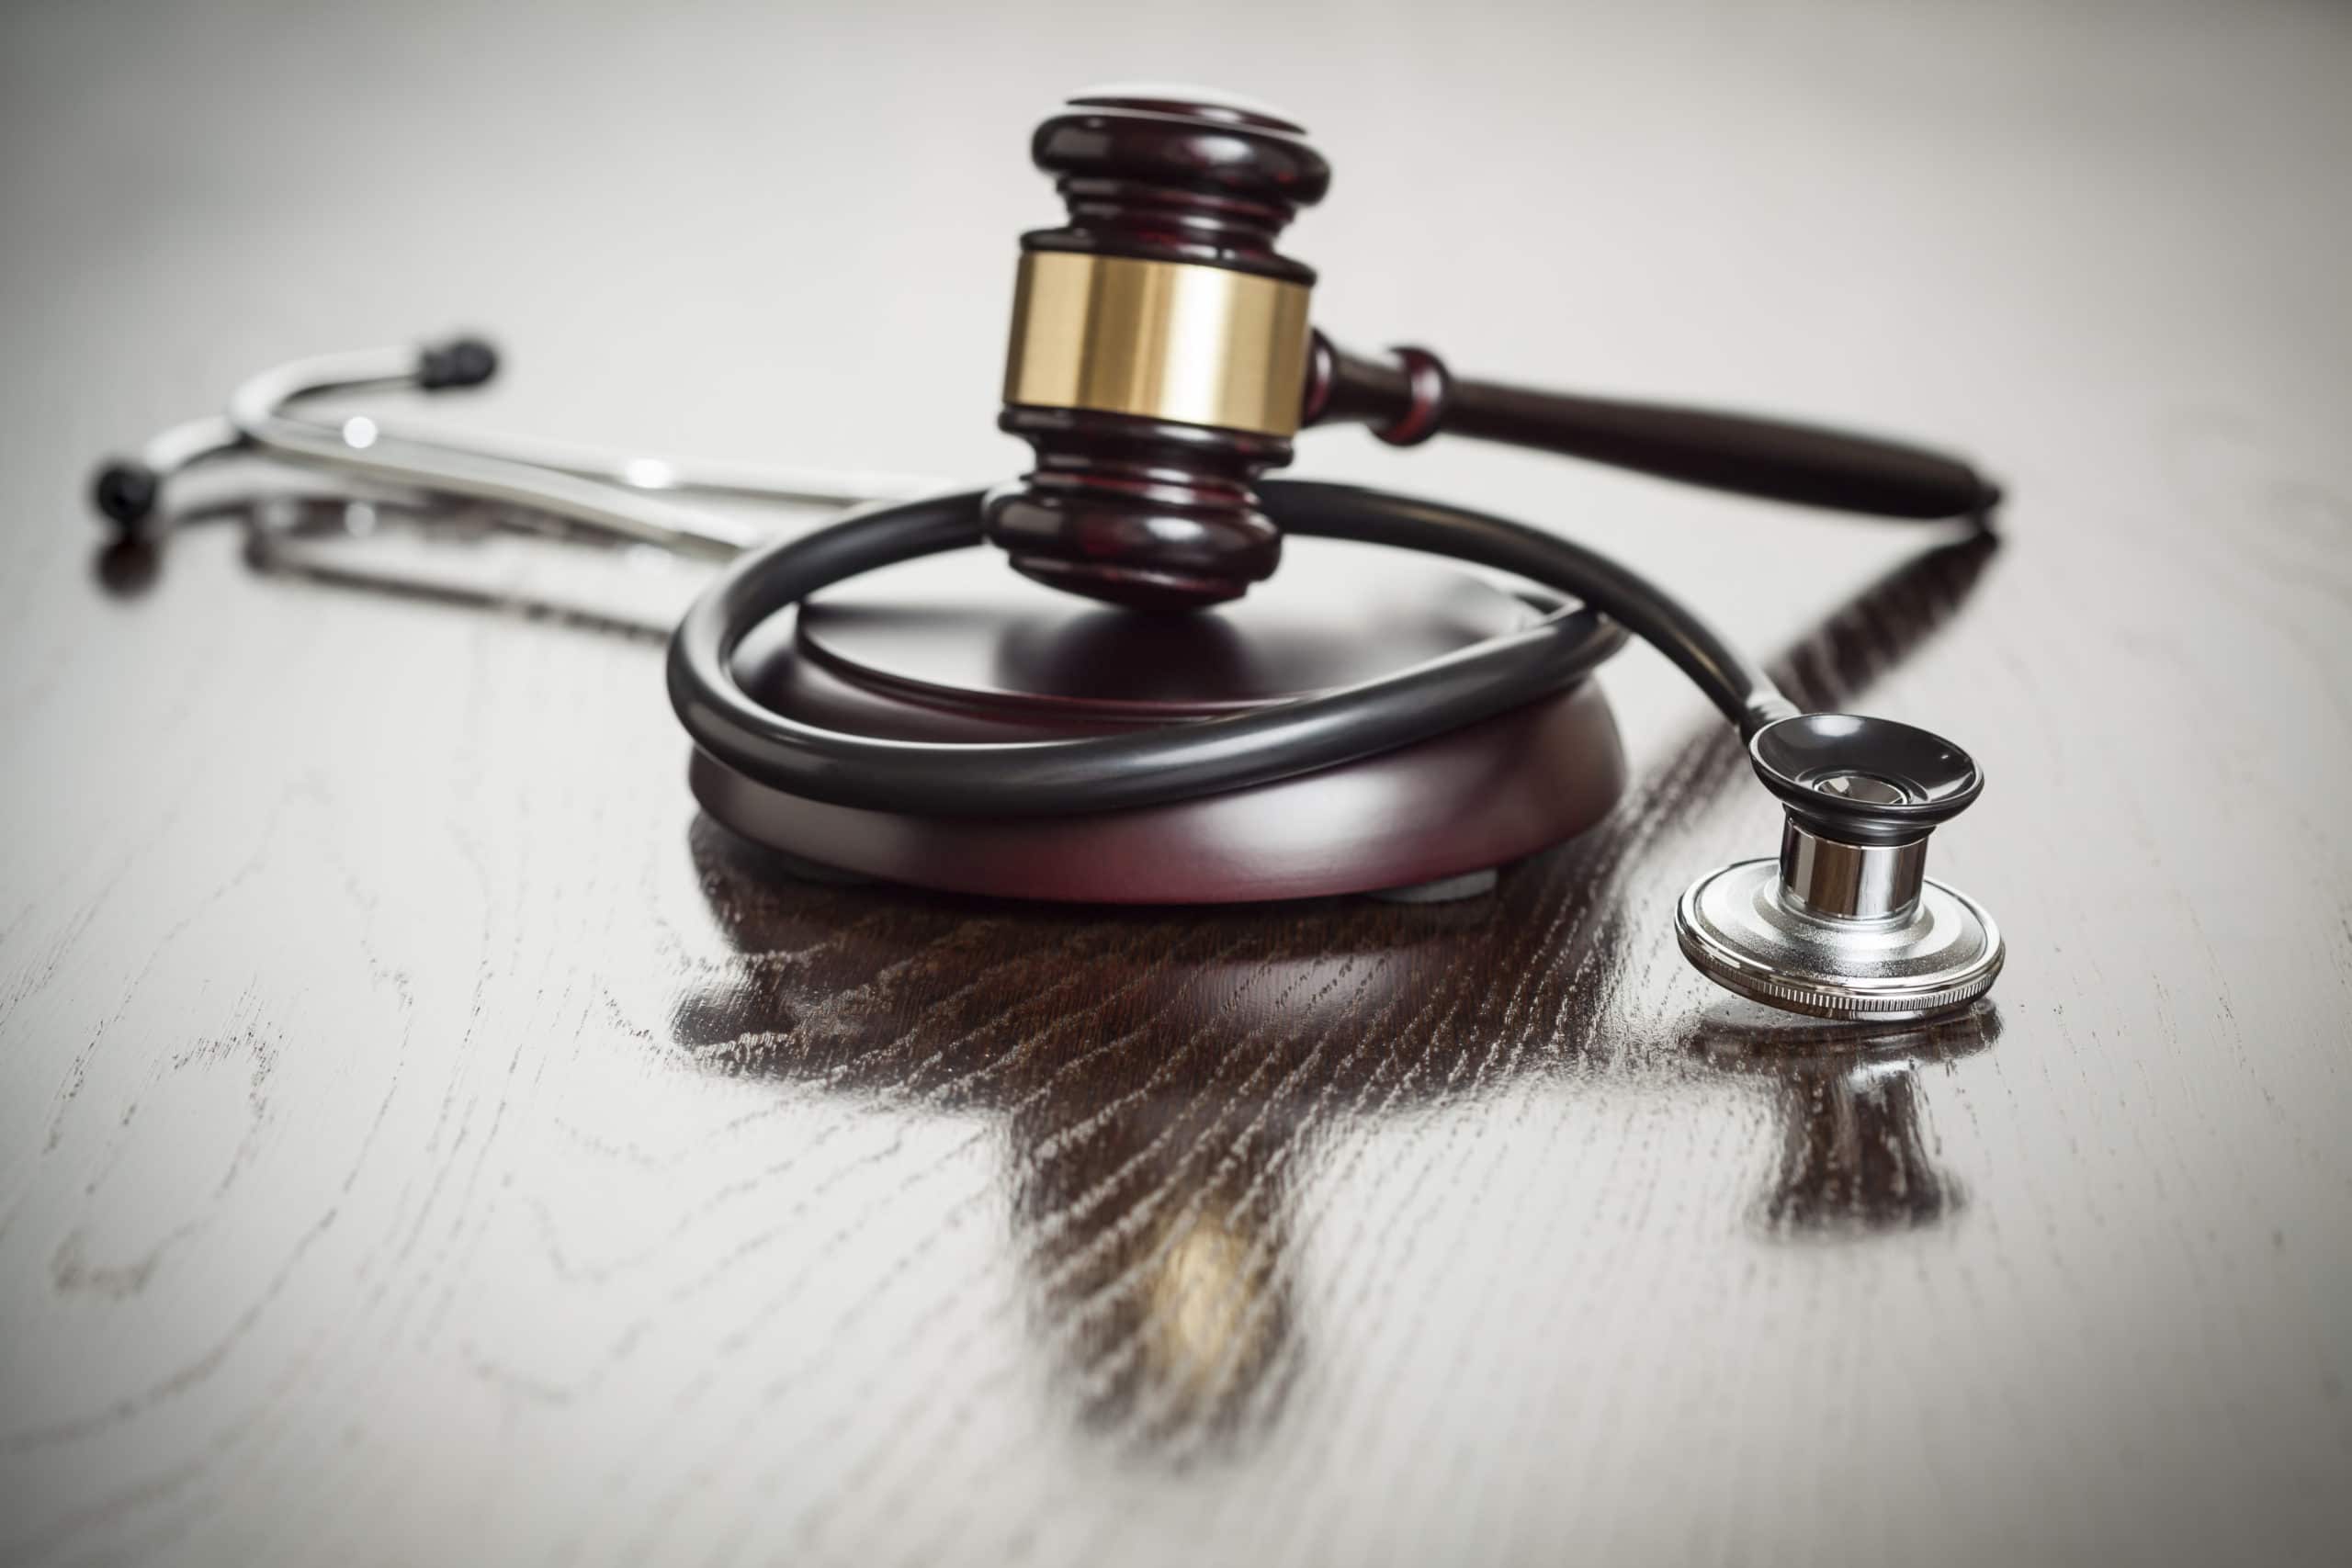 Gavel And Stethoscope On A Table | Medical Malpractice Lawyers in NYC | Gash & Associates, P.C.